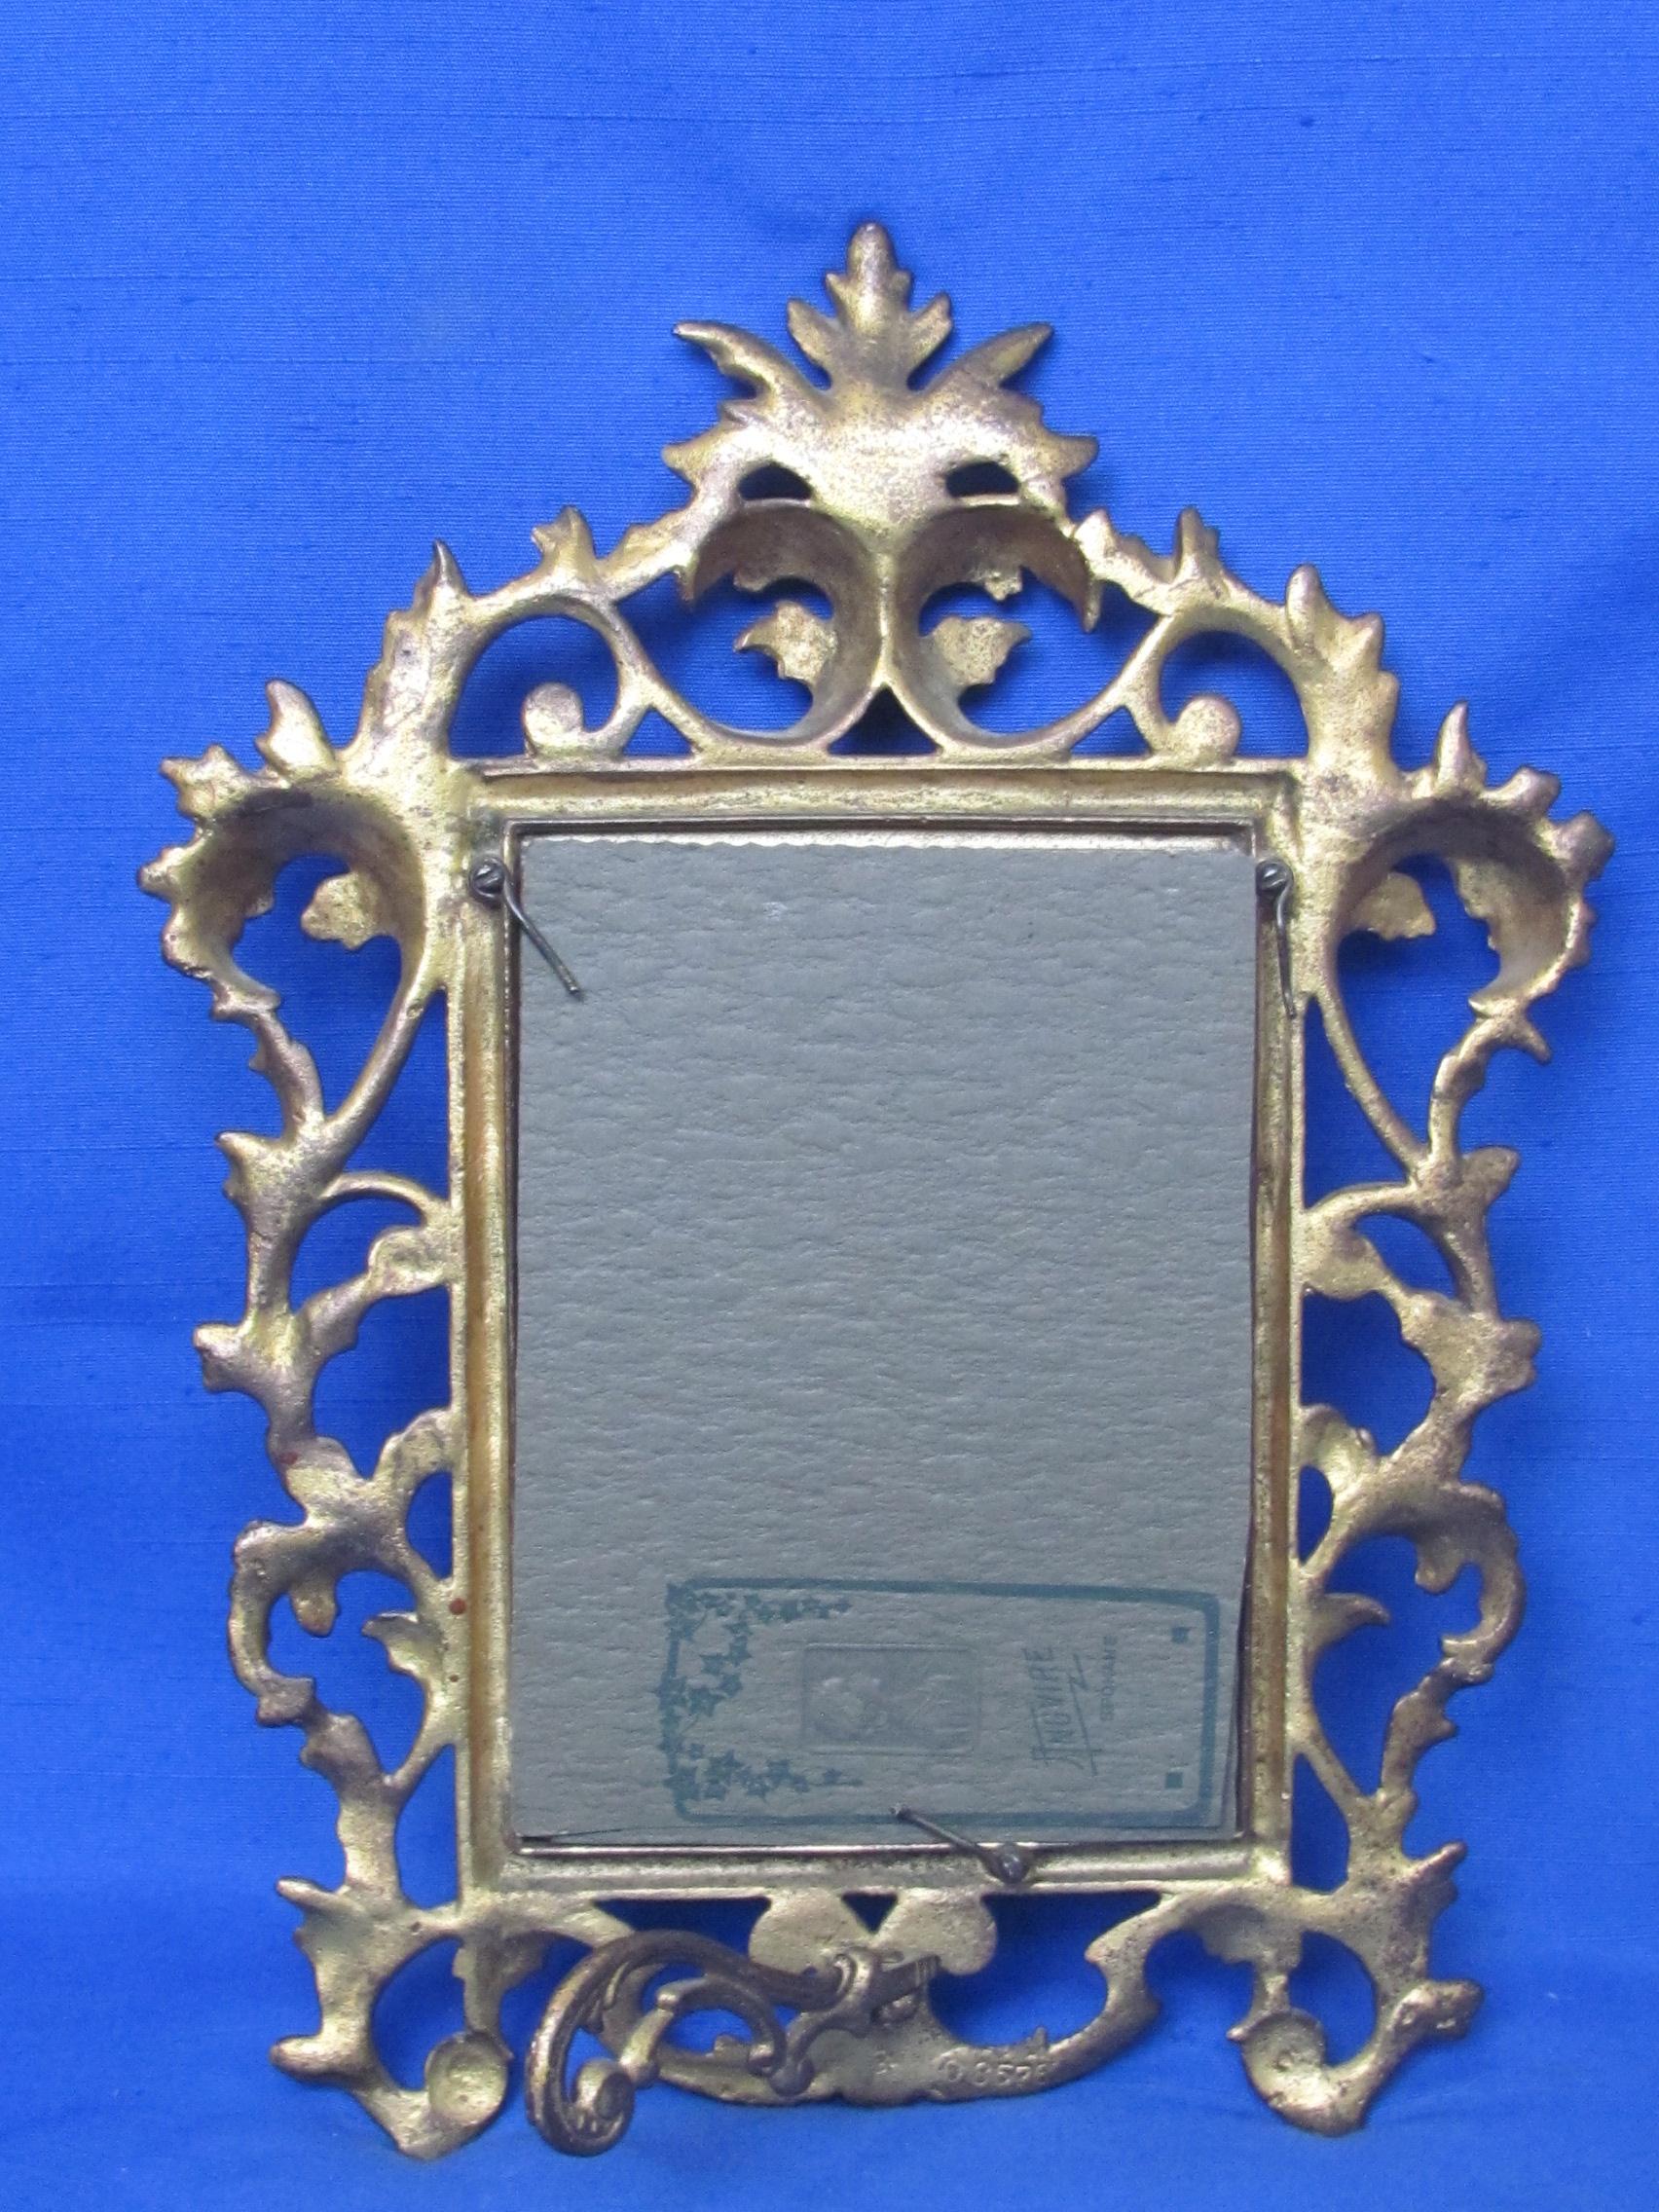 Pair of Vintage Cast Iron Picture Frames with Black & White Photos – 11 1/2” to 12” tall